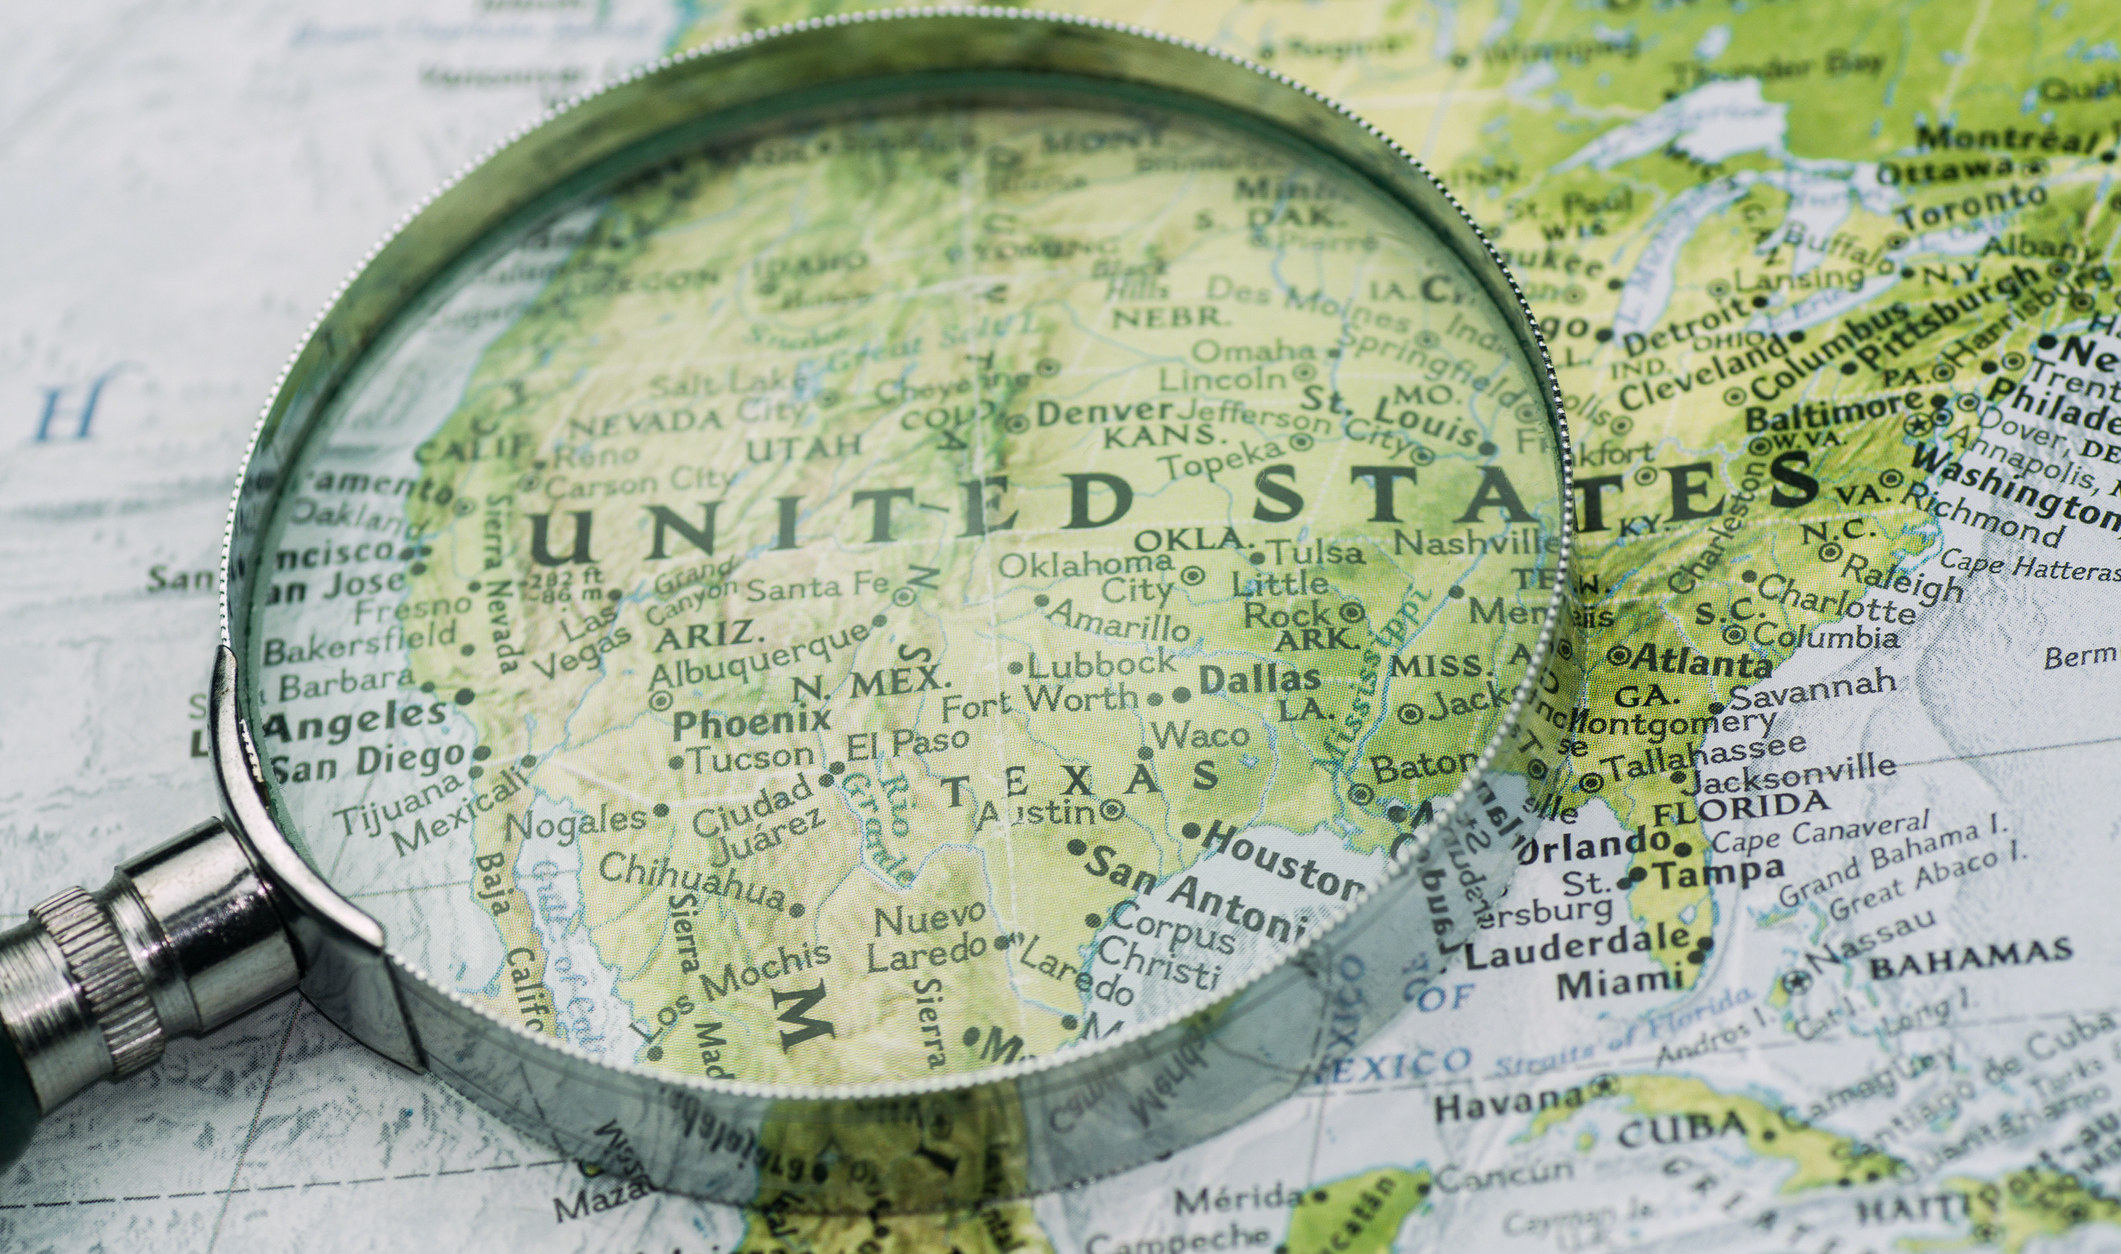 A shot of a magnifier glass over map of united states